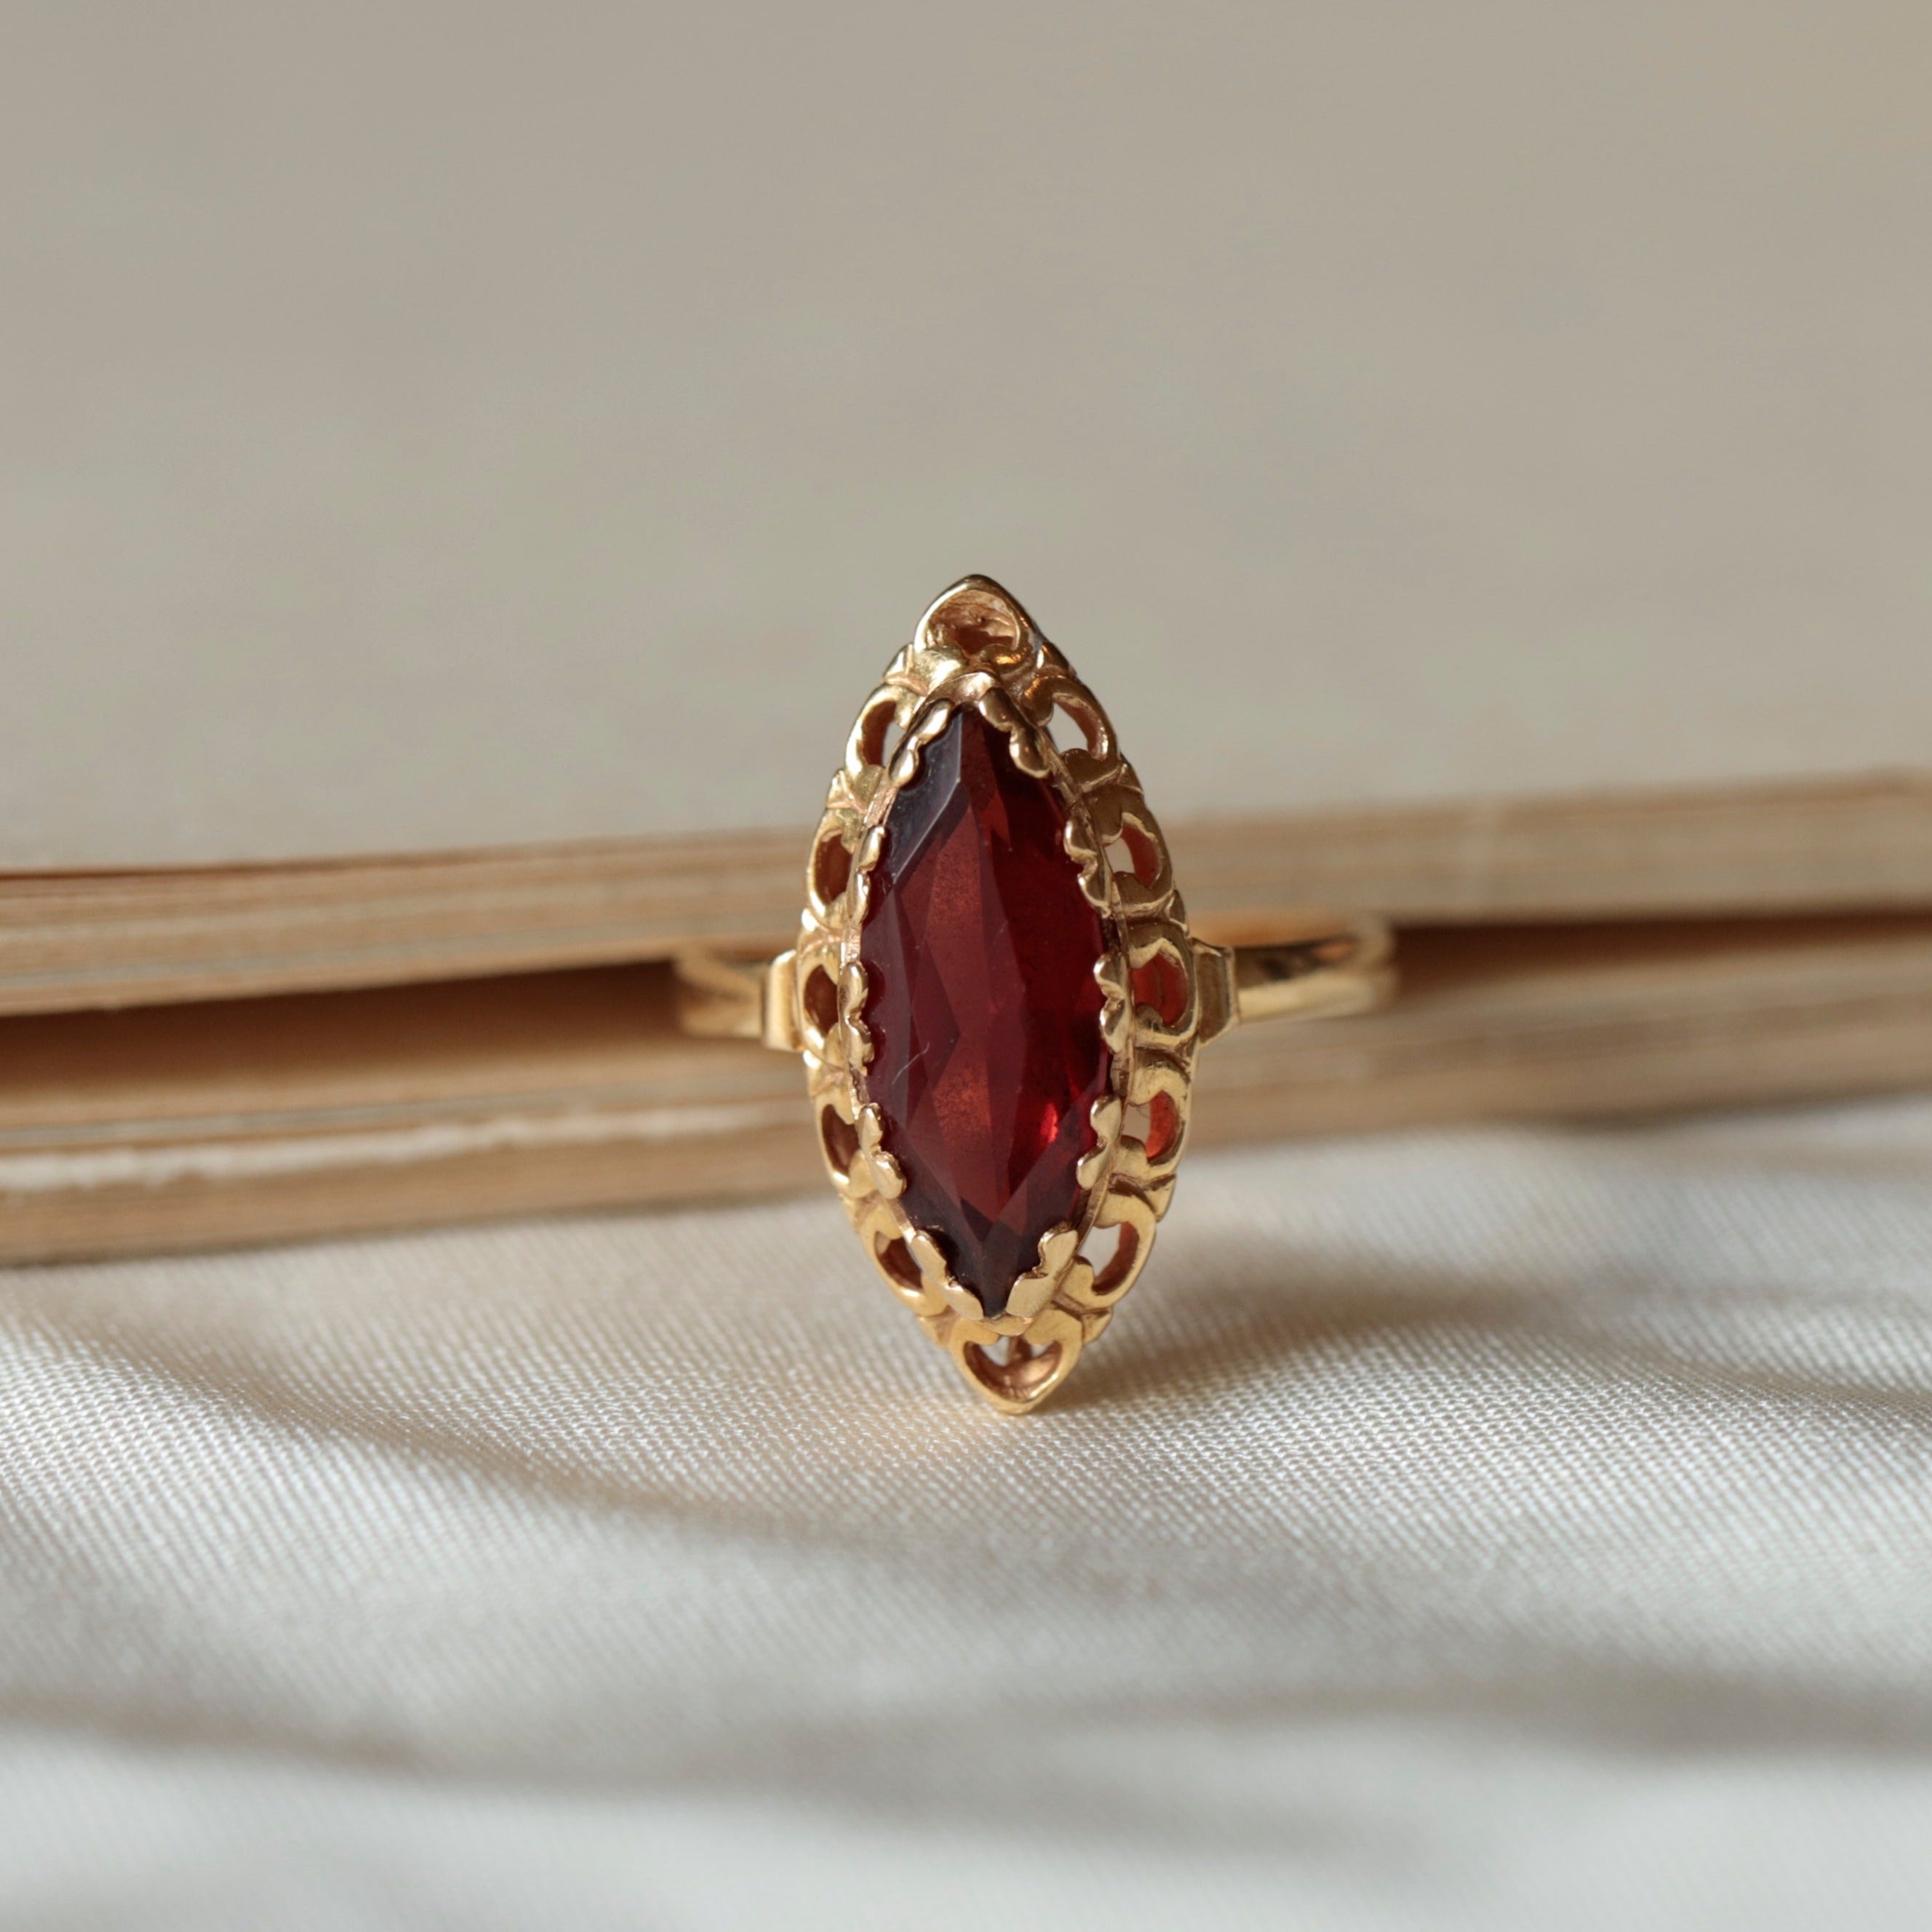 Bague marquise pierre rouge